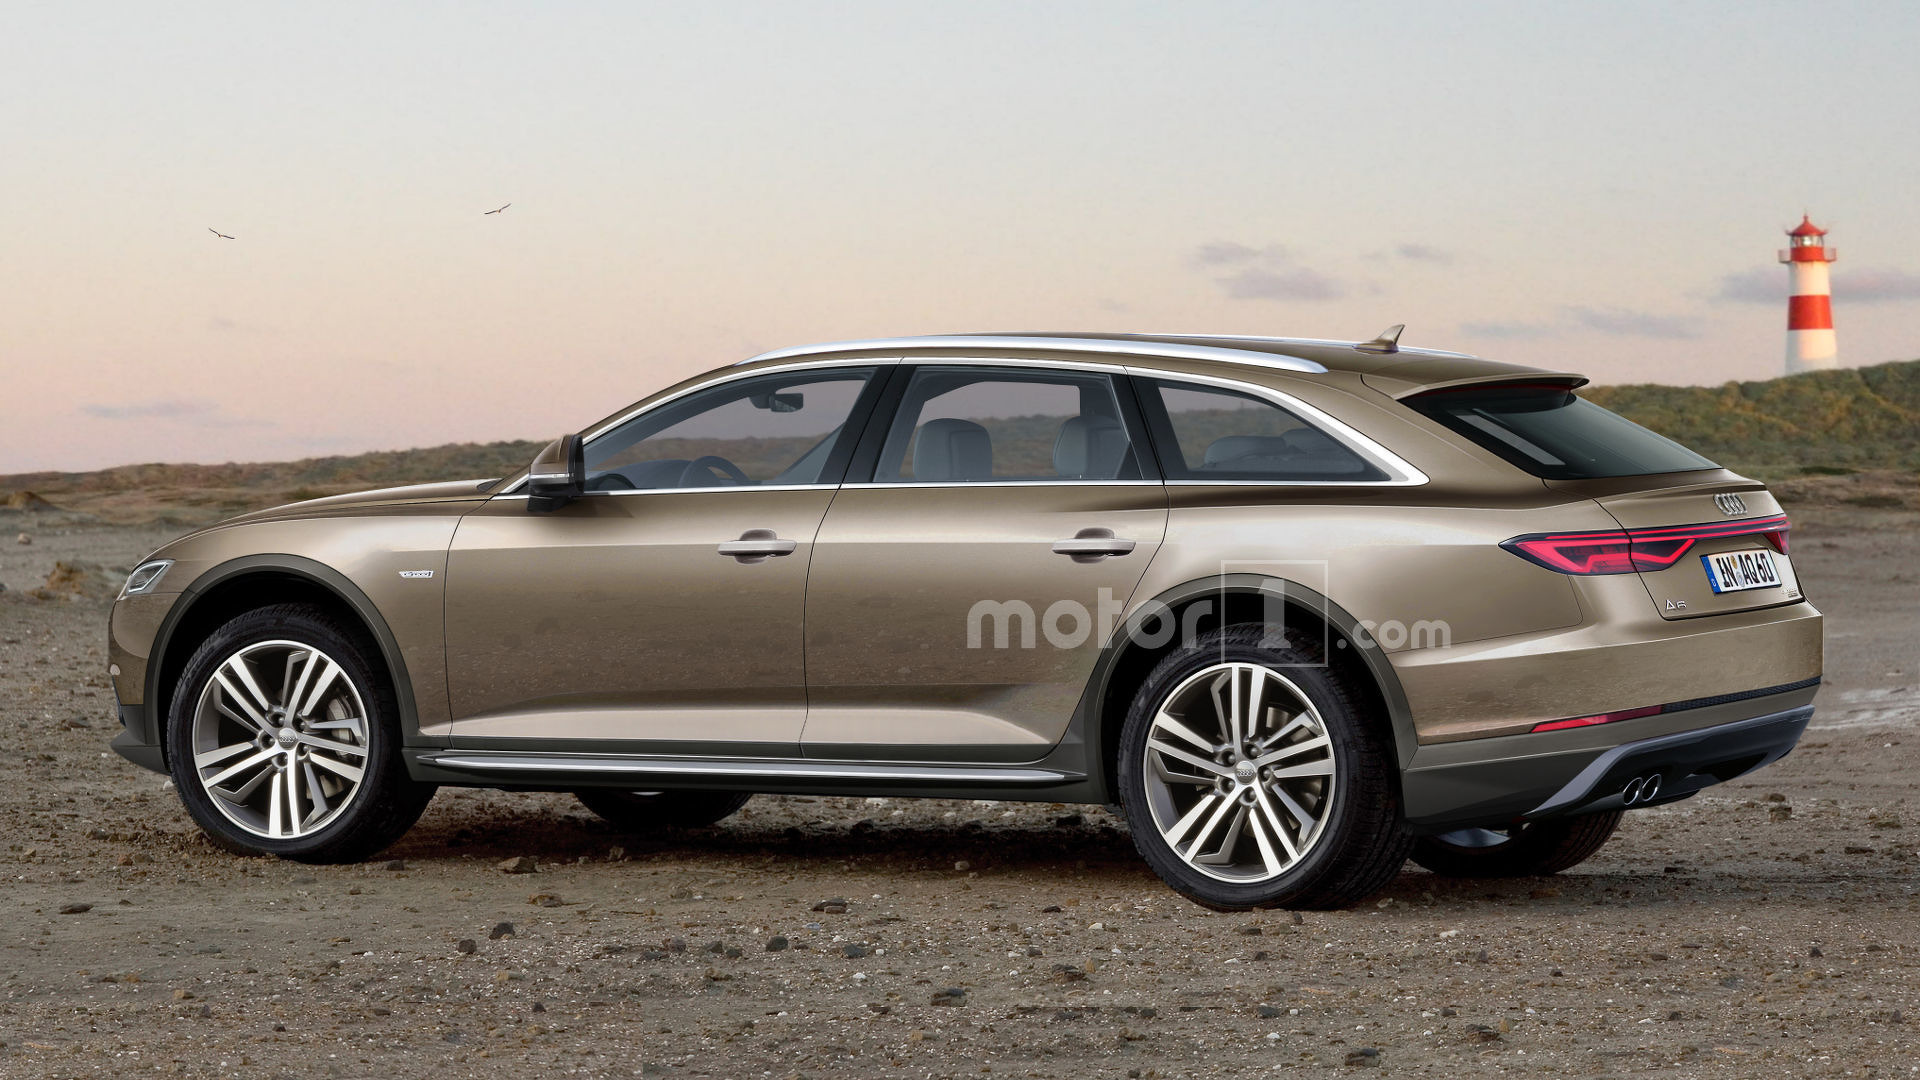 Audi A6 Allroad Rendering Looks Ready To Get Dirty